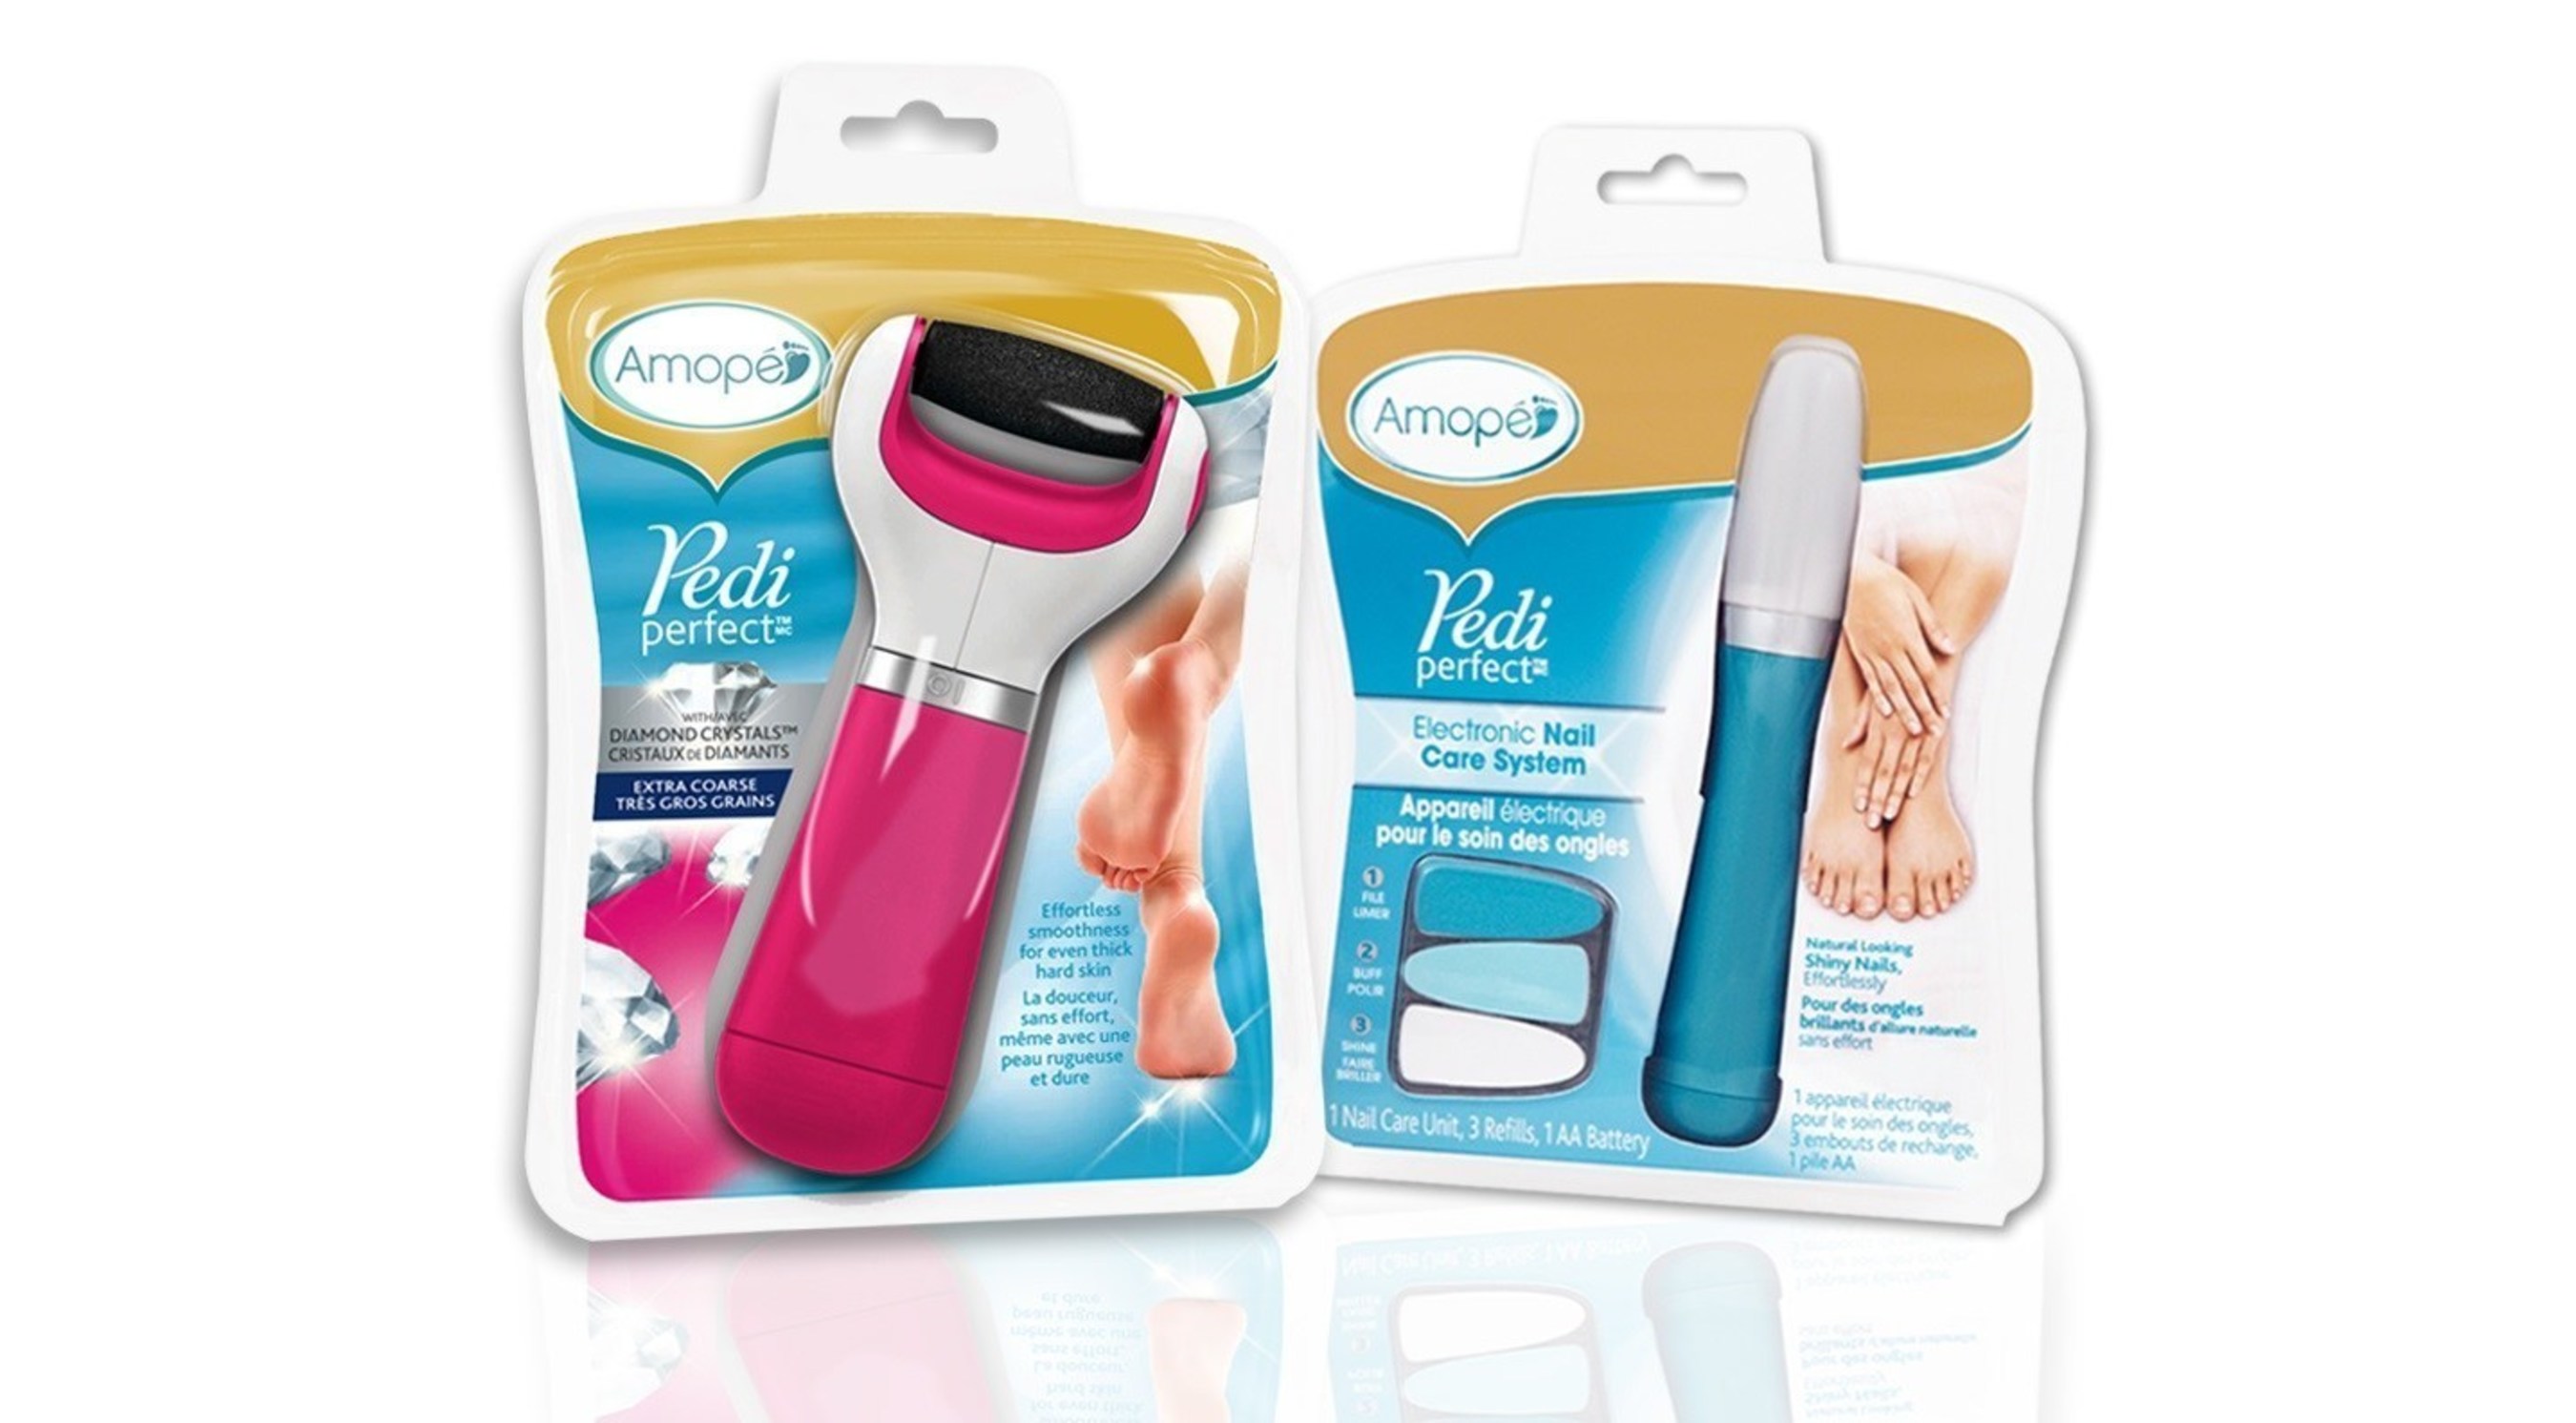 AMOPE PEDI PERFECT(TM) EXPANDS ITS REVOLUTIONARY FOOT CARE PORTFOLIO WITH ELECTRONIC NAIL CARE SYSTEM AND NEW AND IMPROVED FOOT FILE WITH DIAMOND CRYSTALS